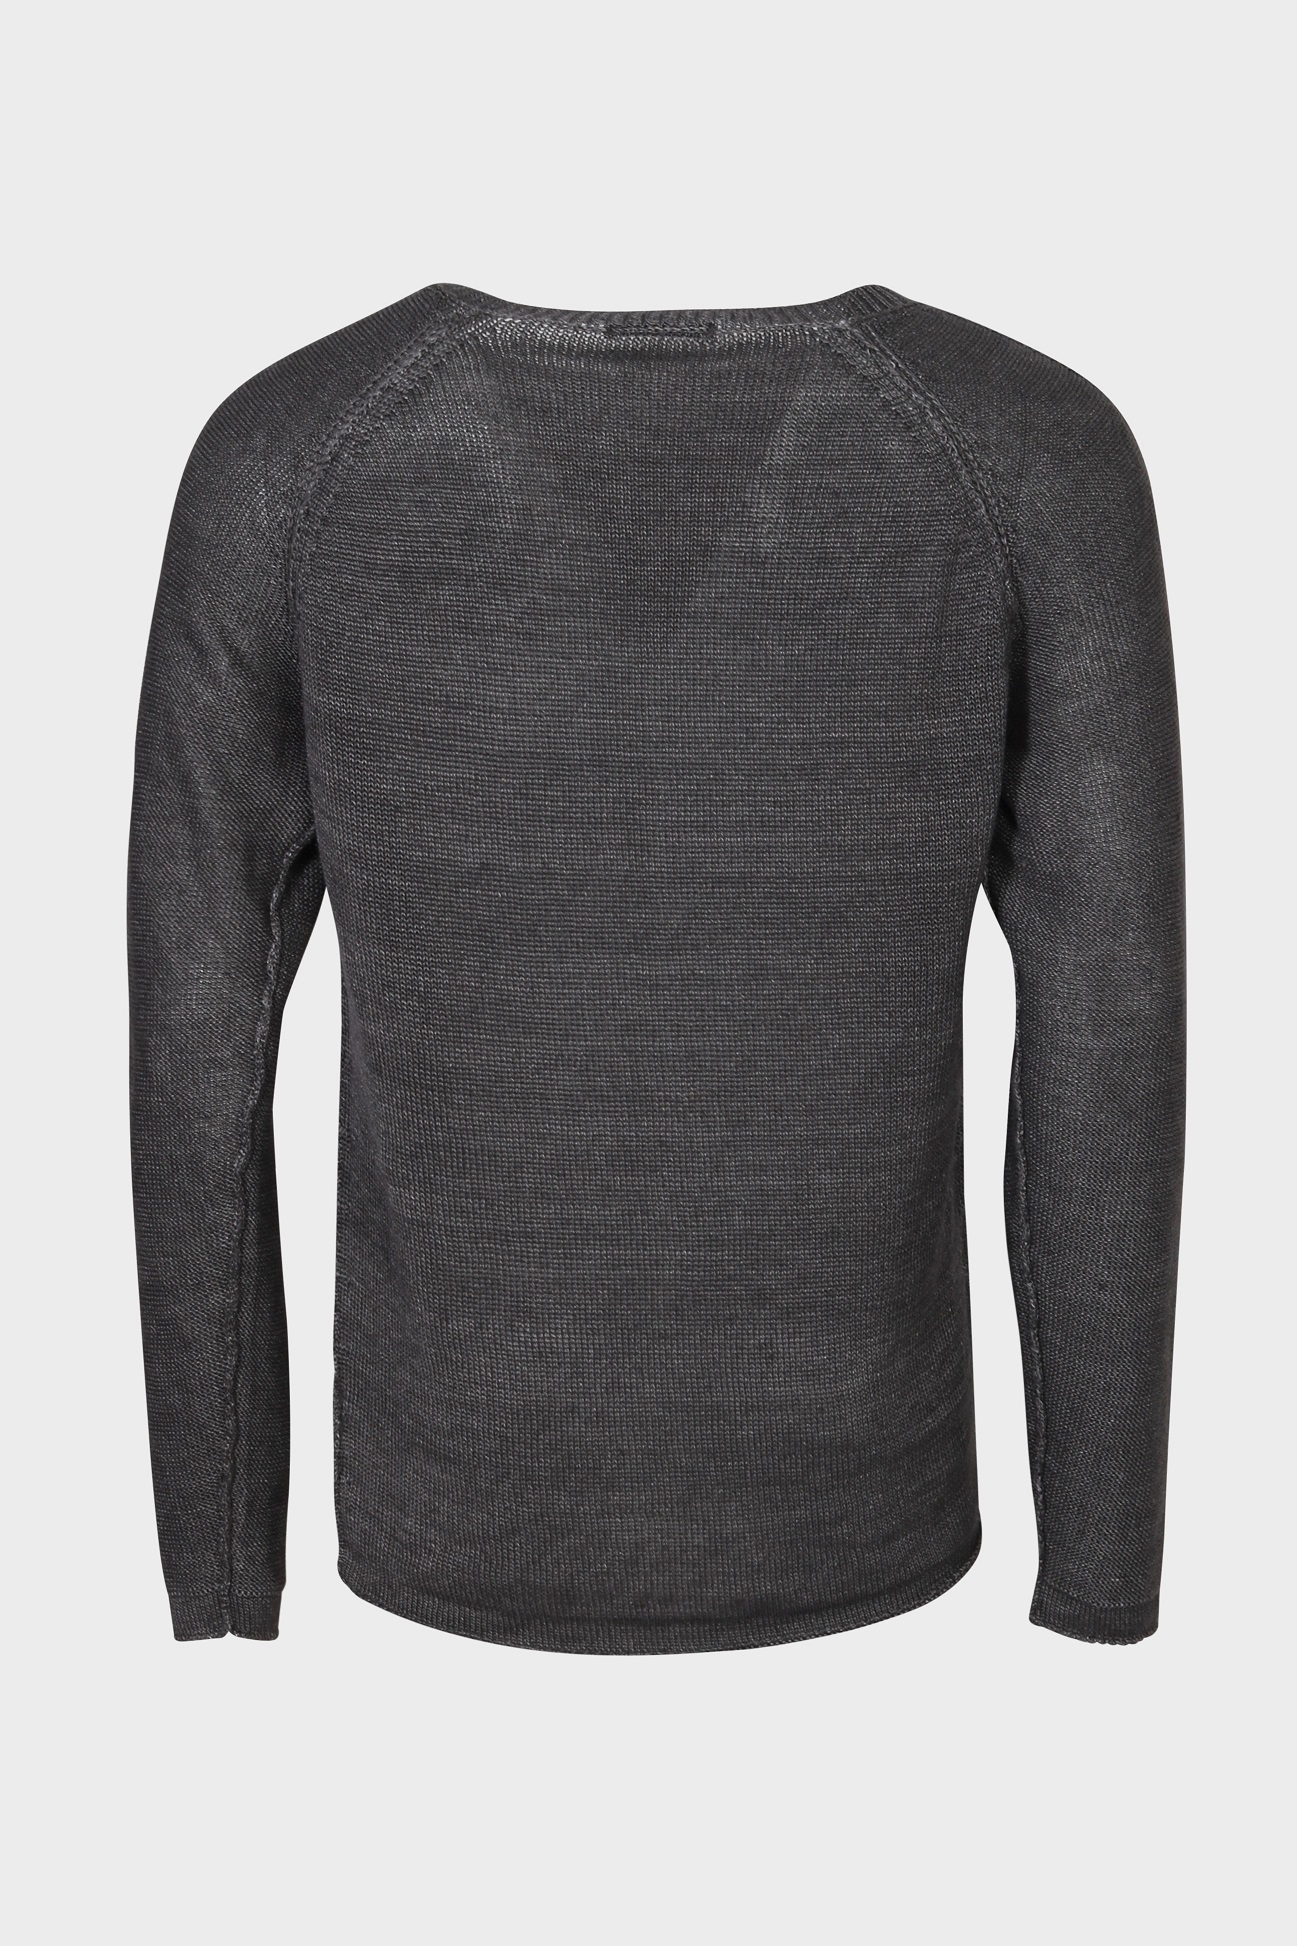 TRANSIT UOMO Linen Knit Pullover in Charcoal XL